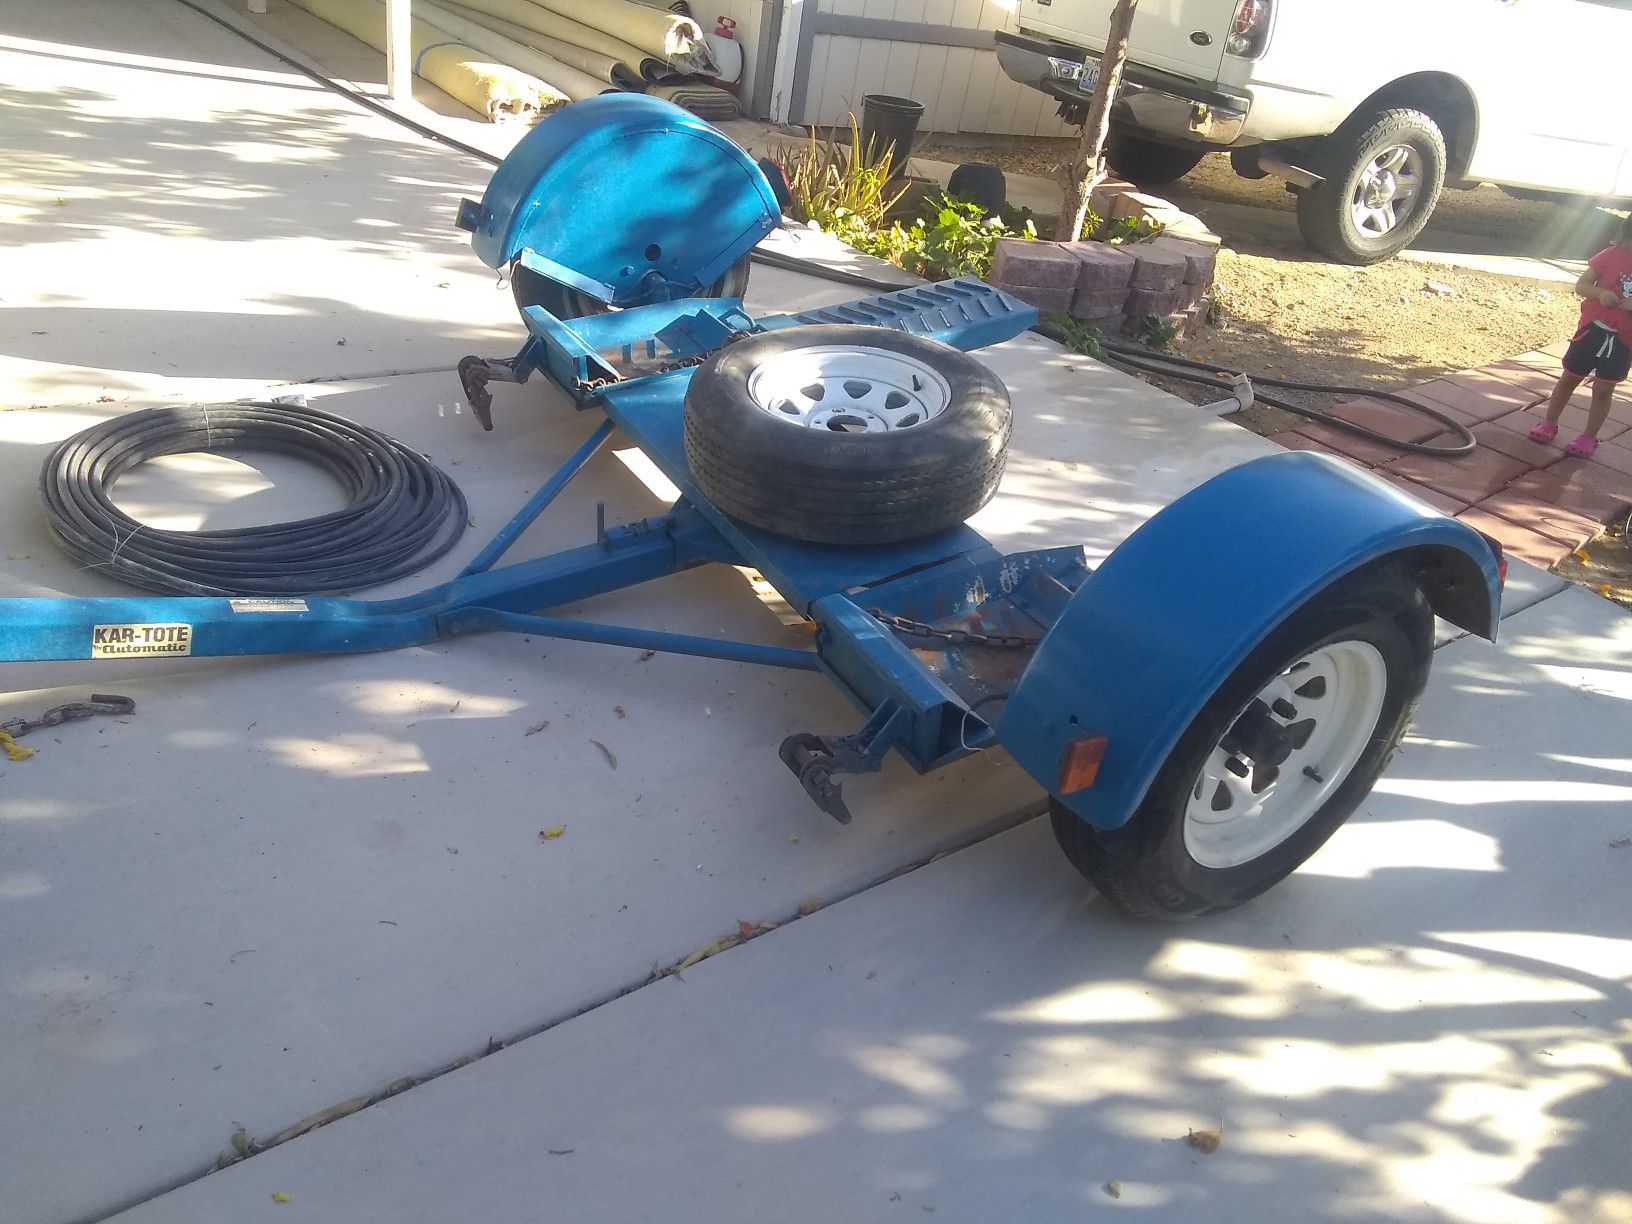 Car dolly for sale $680